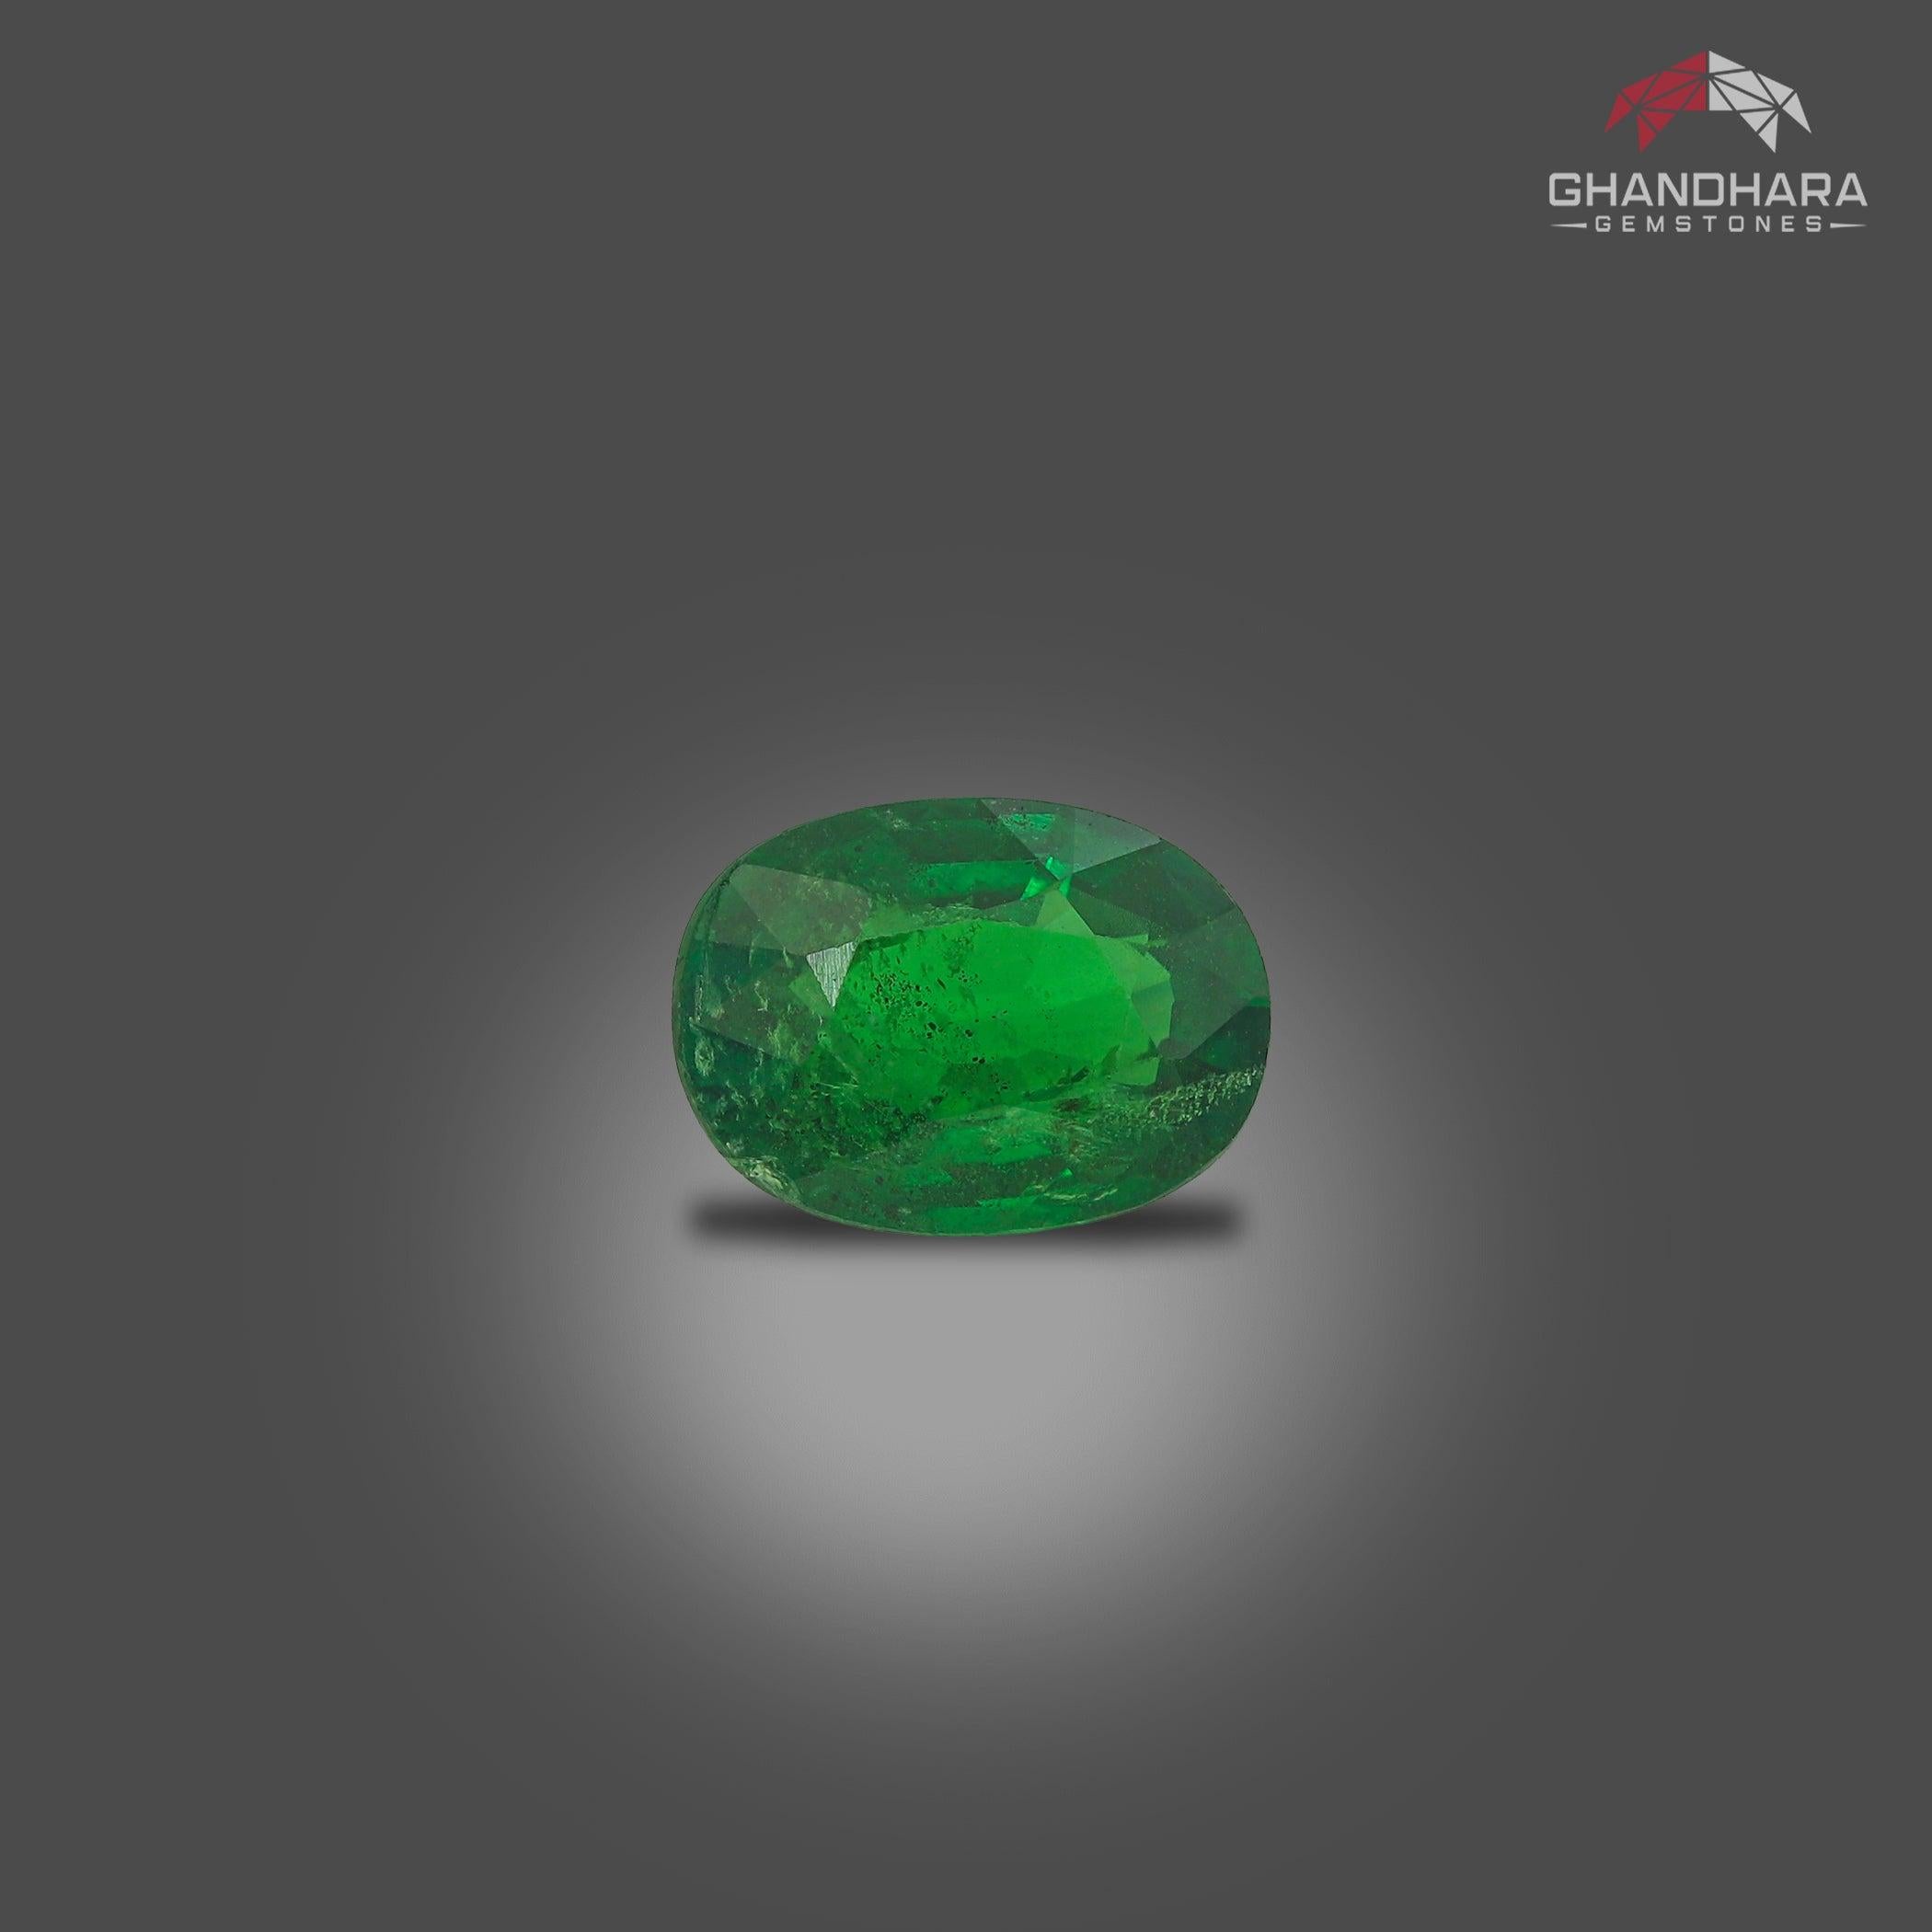 Soft Green Natural Tsavorite Garnet of 1.40 carats from Kenya has a wonderful cut in a Oval shape, incredible Green color, Great brilliance. This gem is SI Clarity.

 

Product Information:
GEMSTONE NAME: Soft Green Natural Tsavorite